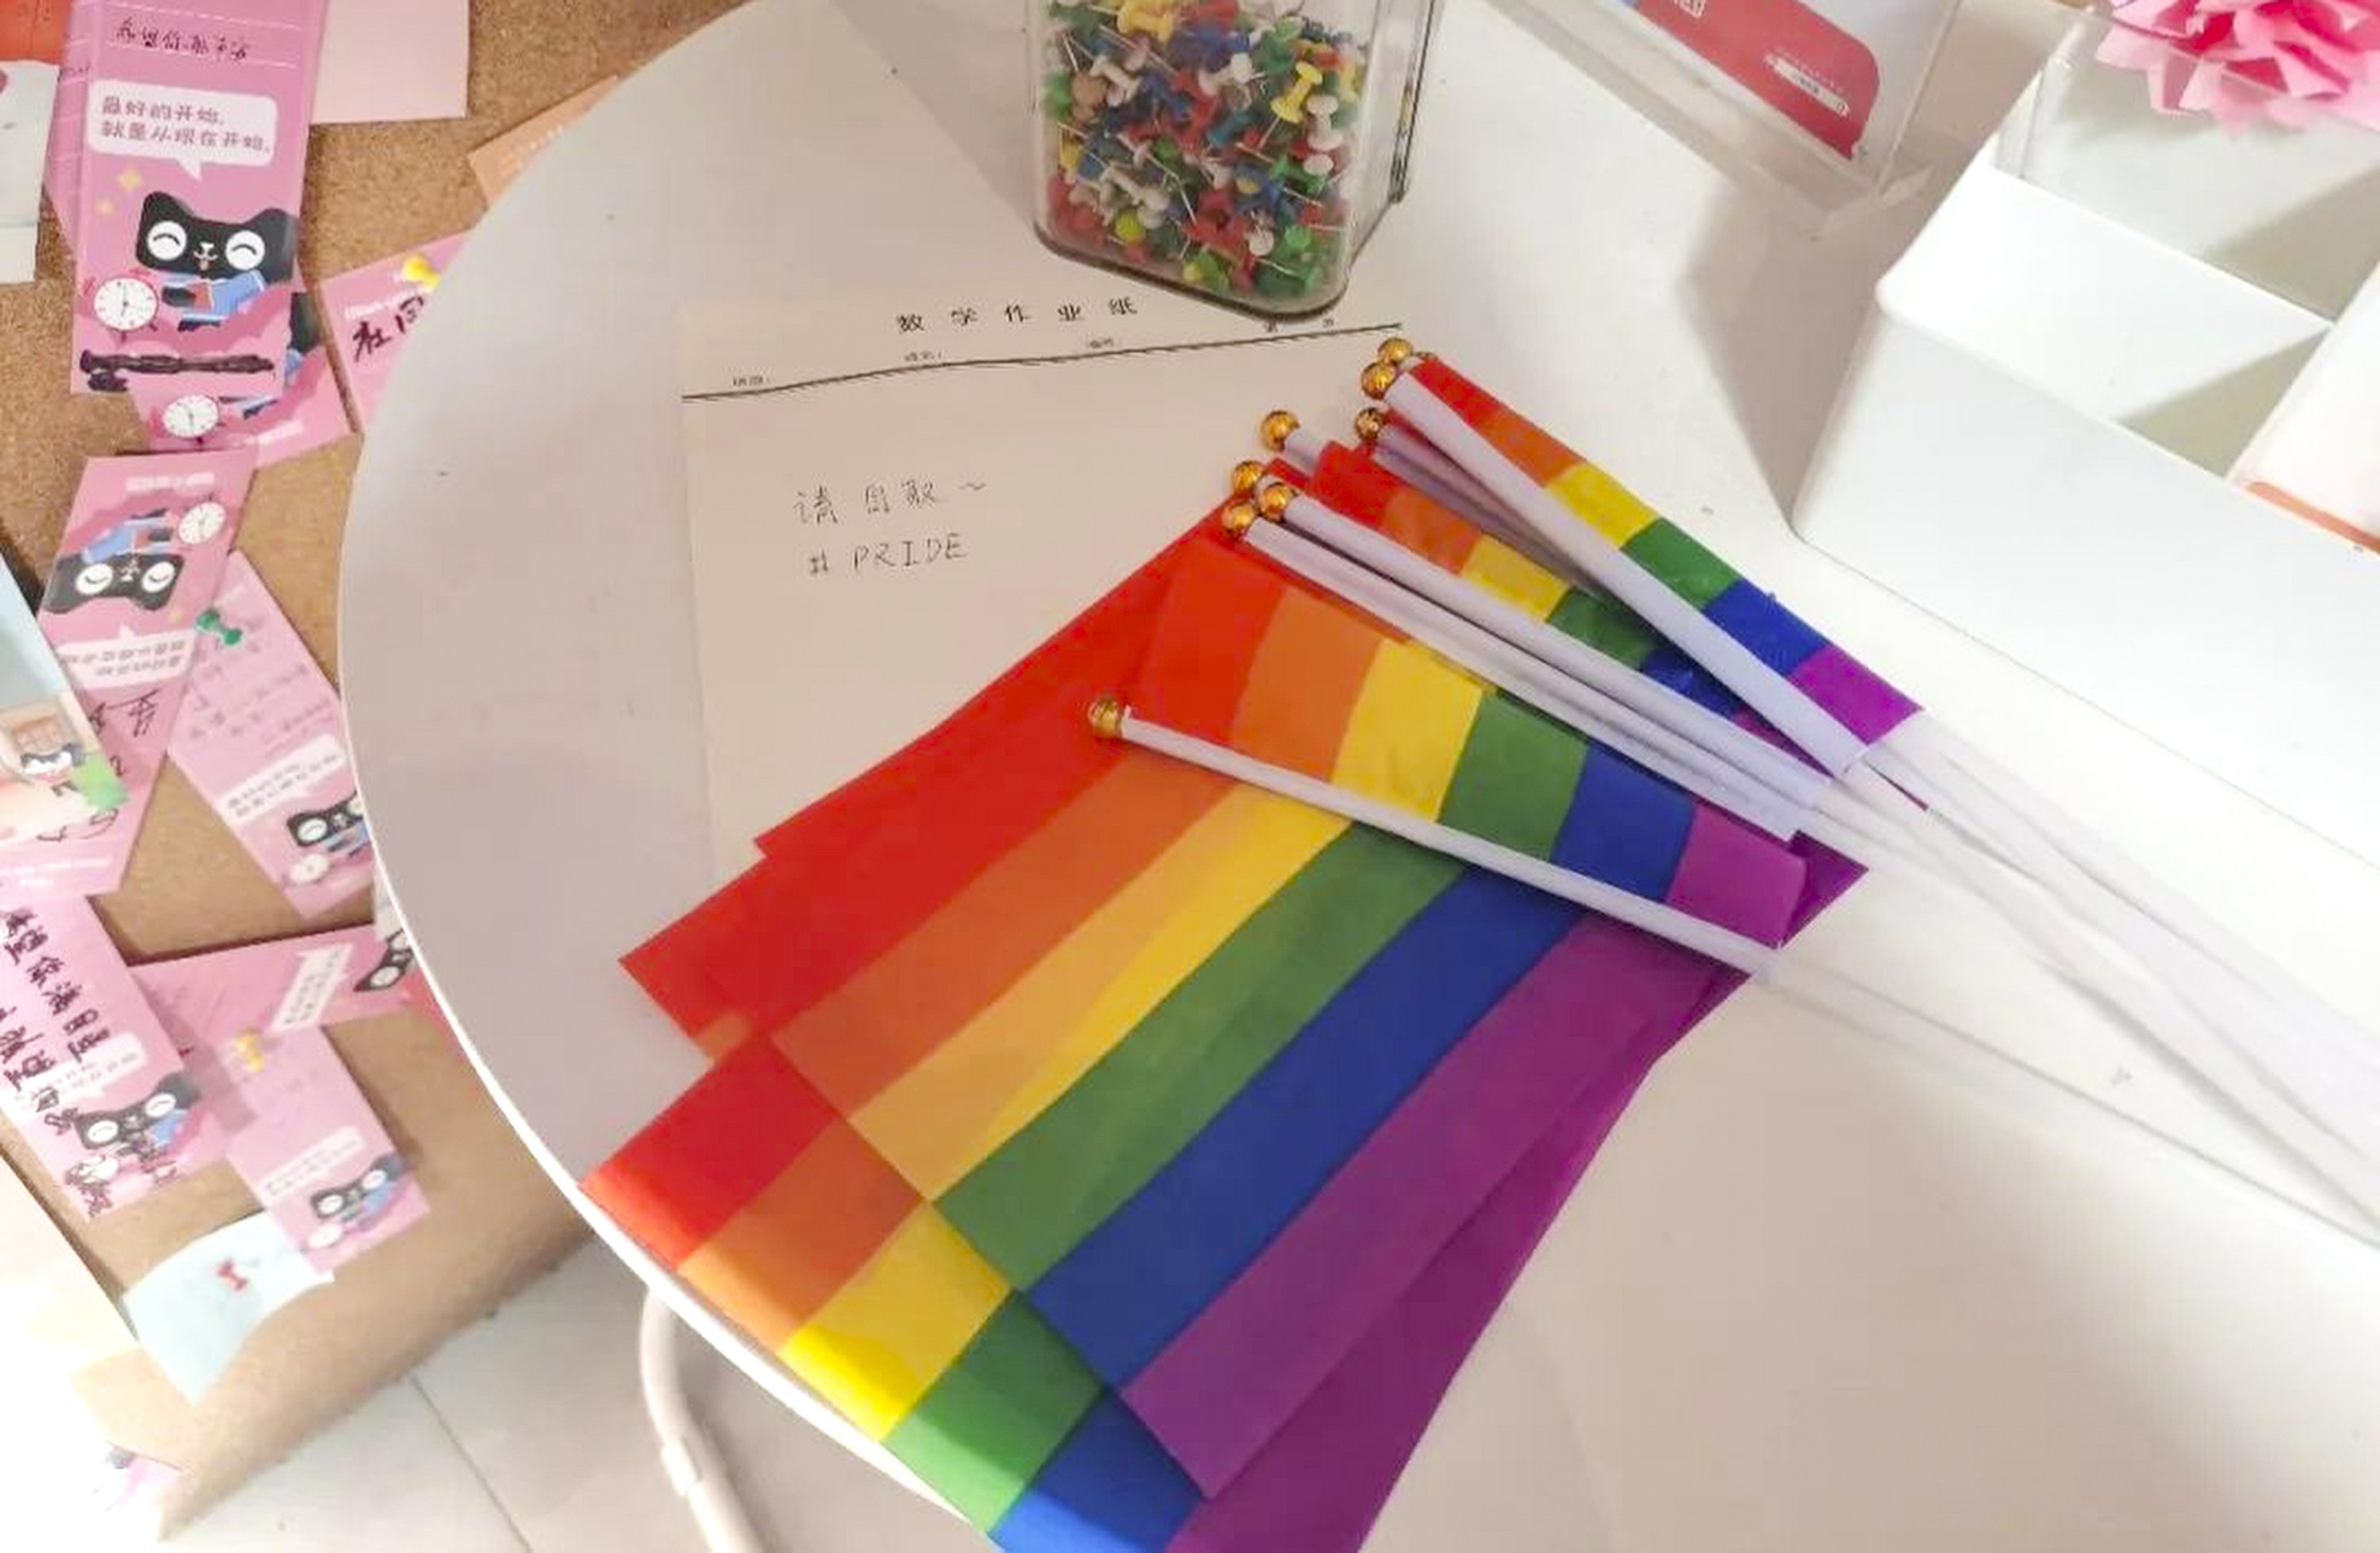 Two Tsinghua University students have been disciplined for leaving rainbow flags in public areas on campus. Photo: Weibo